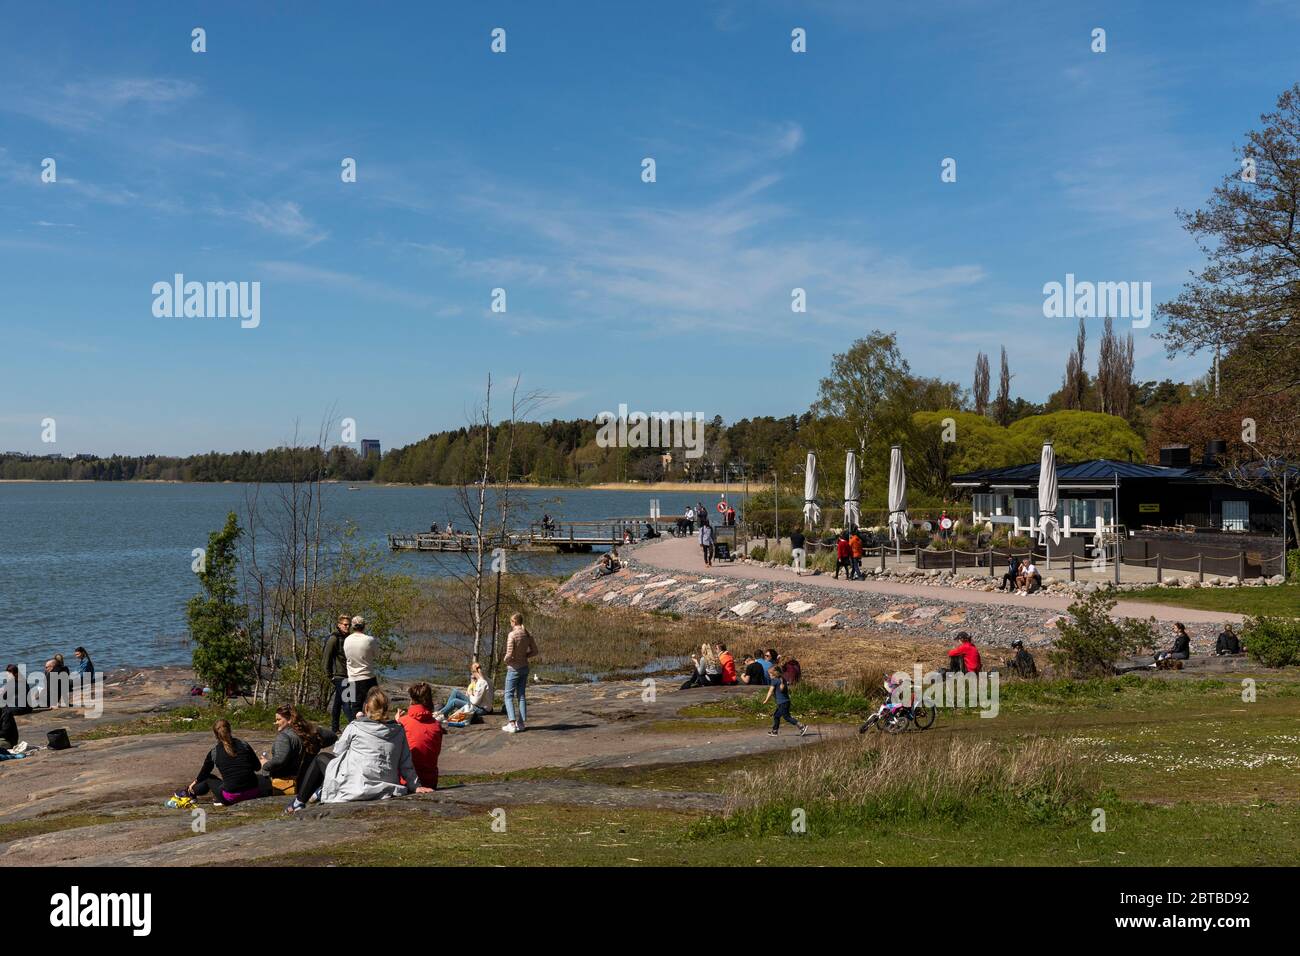 Warm spring days make people get outside and gather in public parks and beaches in Helsinki. Social distancing is being applied though. Stock Photo